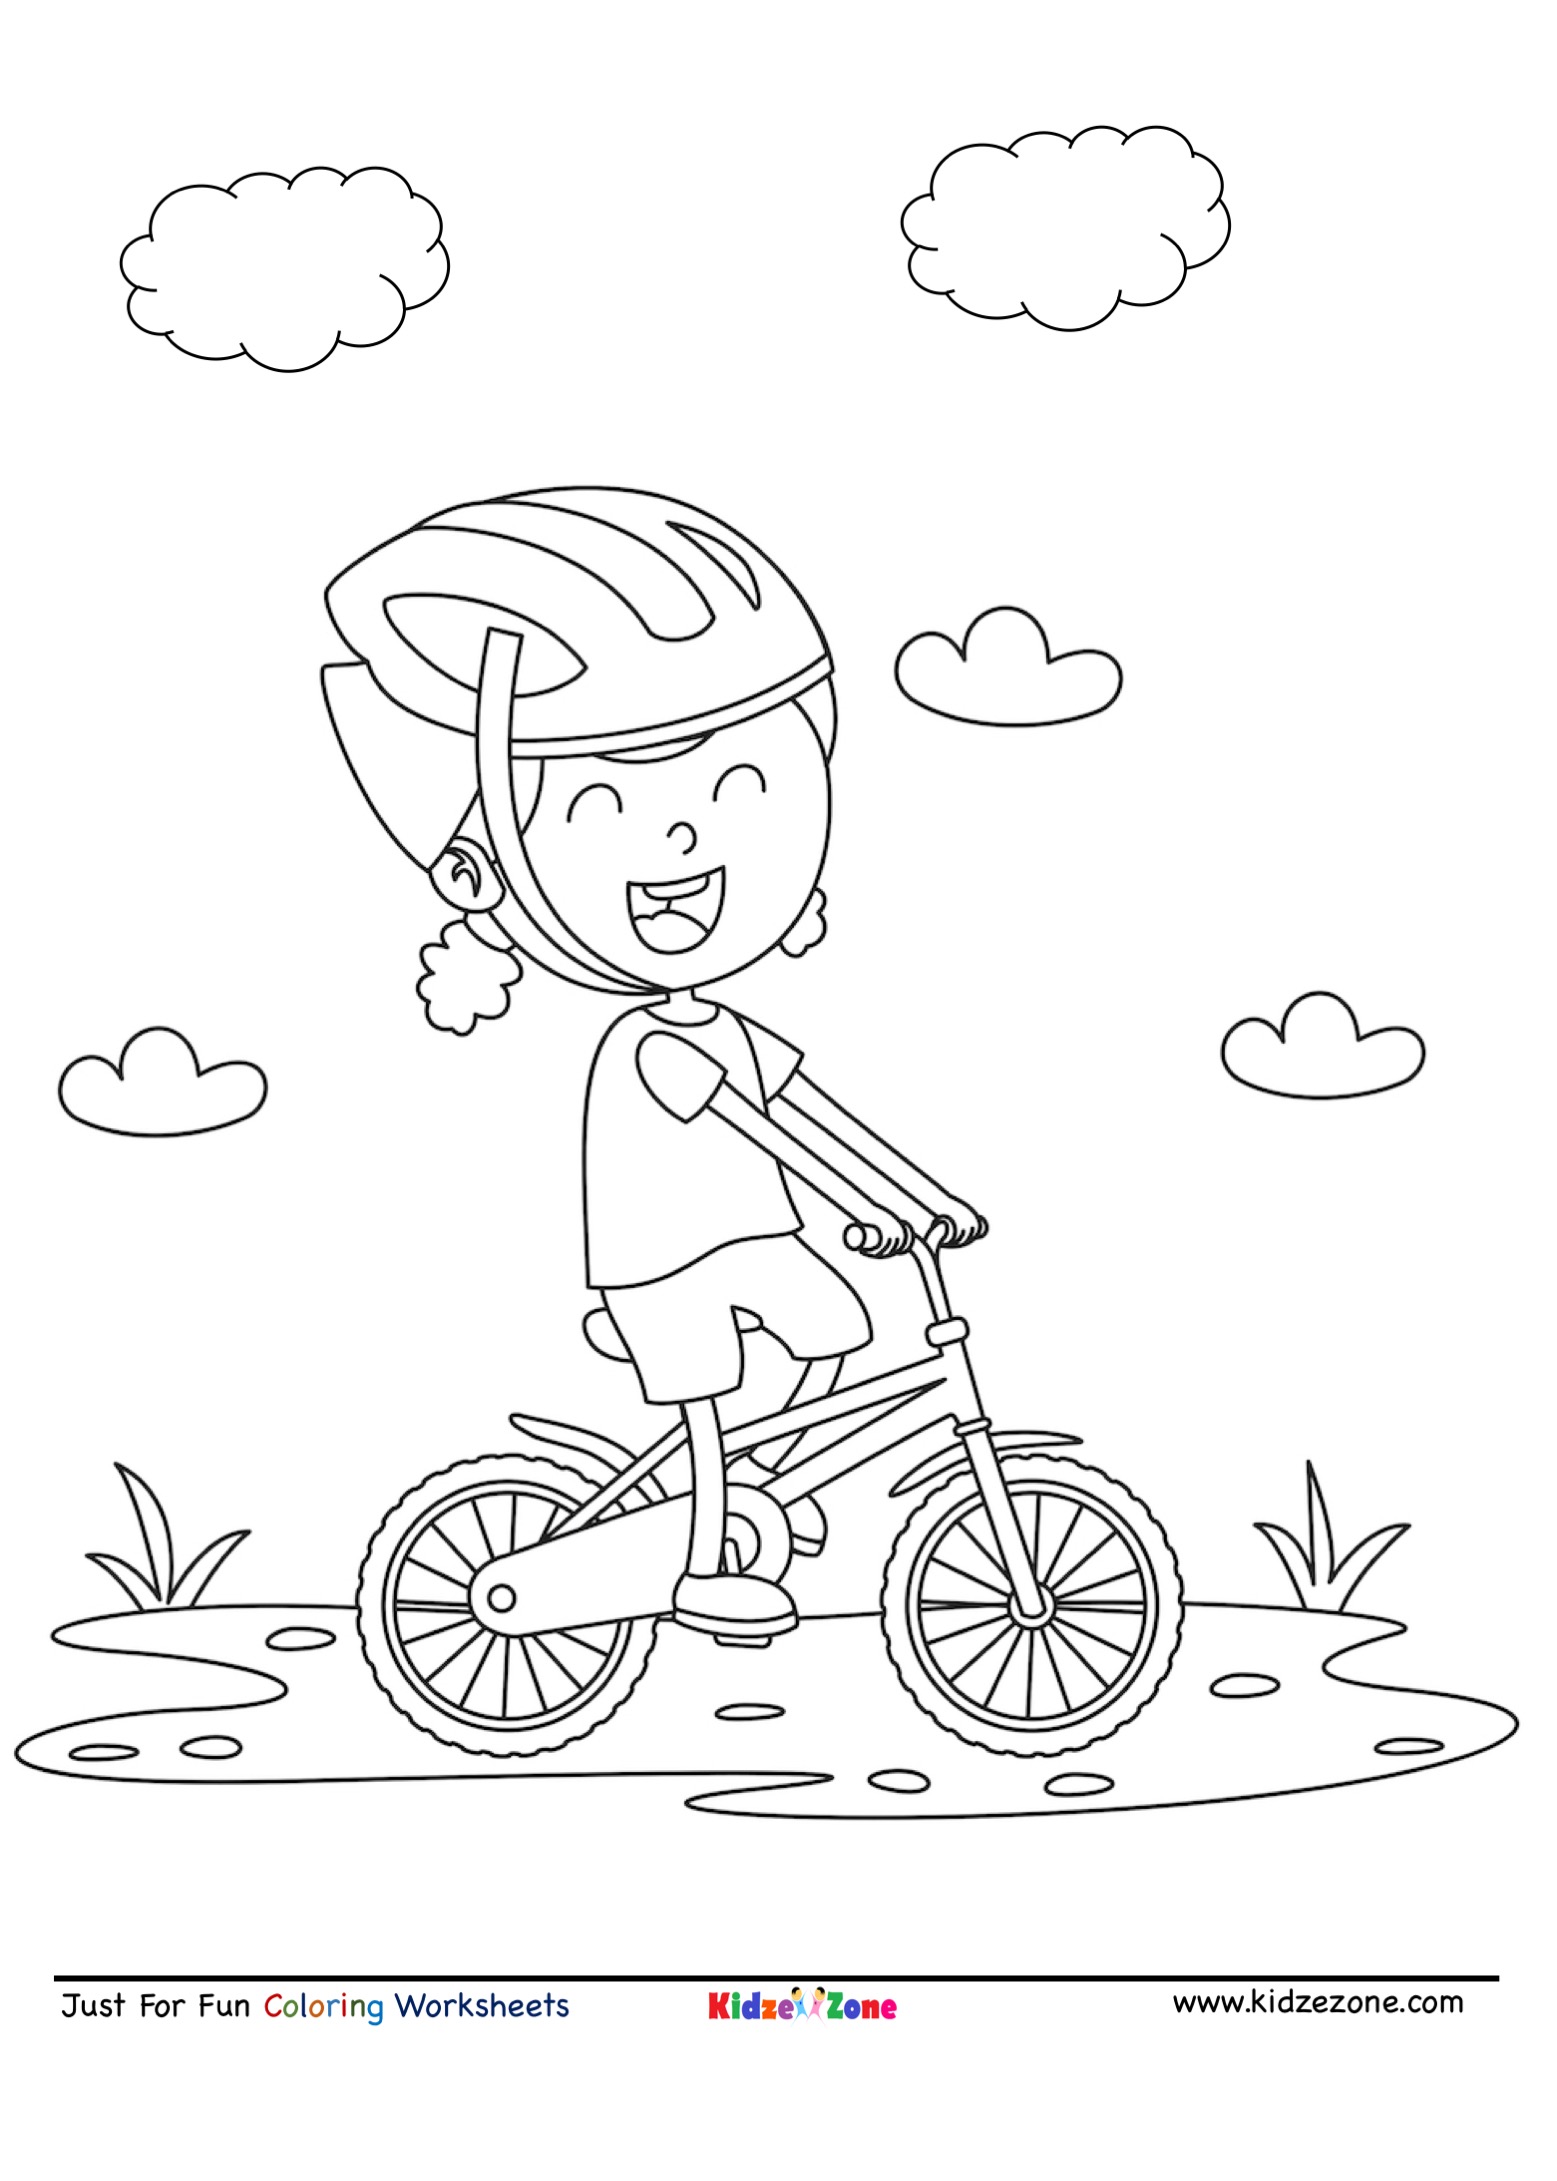 Coloring worksheets for all ages - KidzeZone